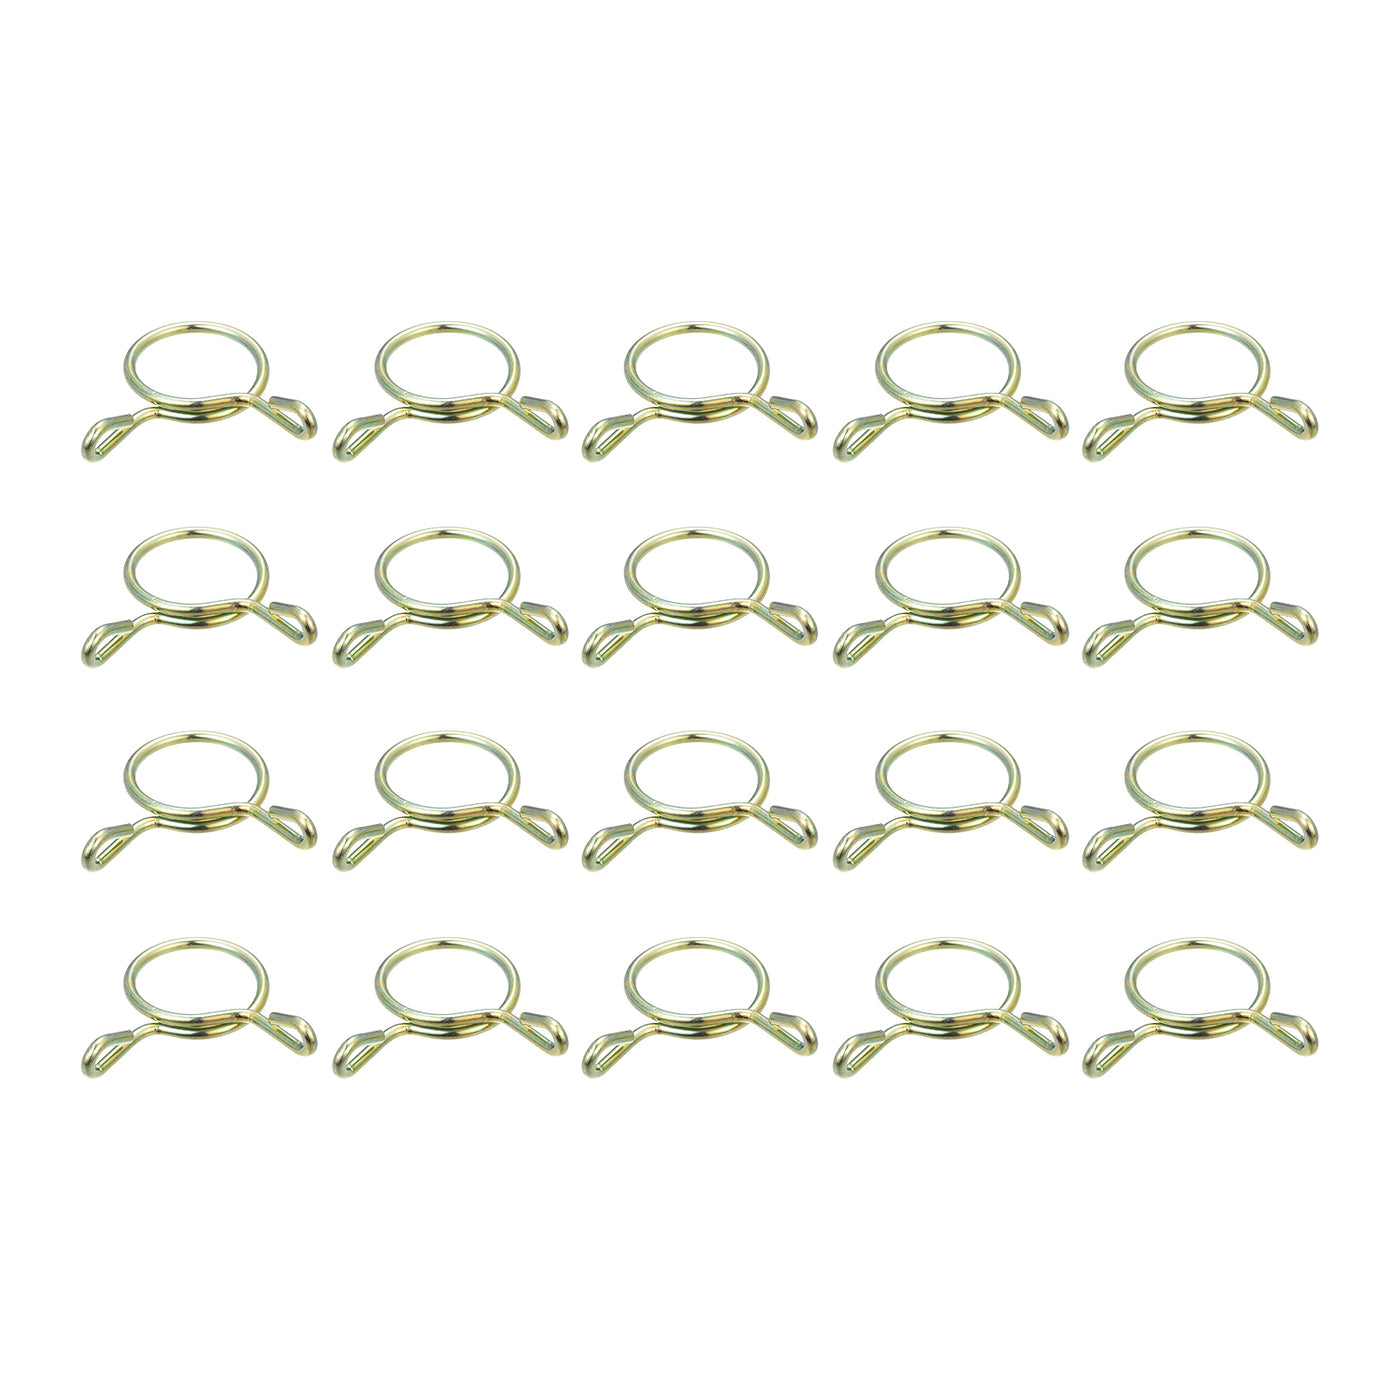 uxcell Uxcell Fuel Line Hose Clips, 20pcs 18mm 65Mn Steel Tubing Spring Clamps